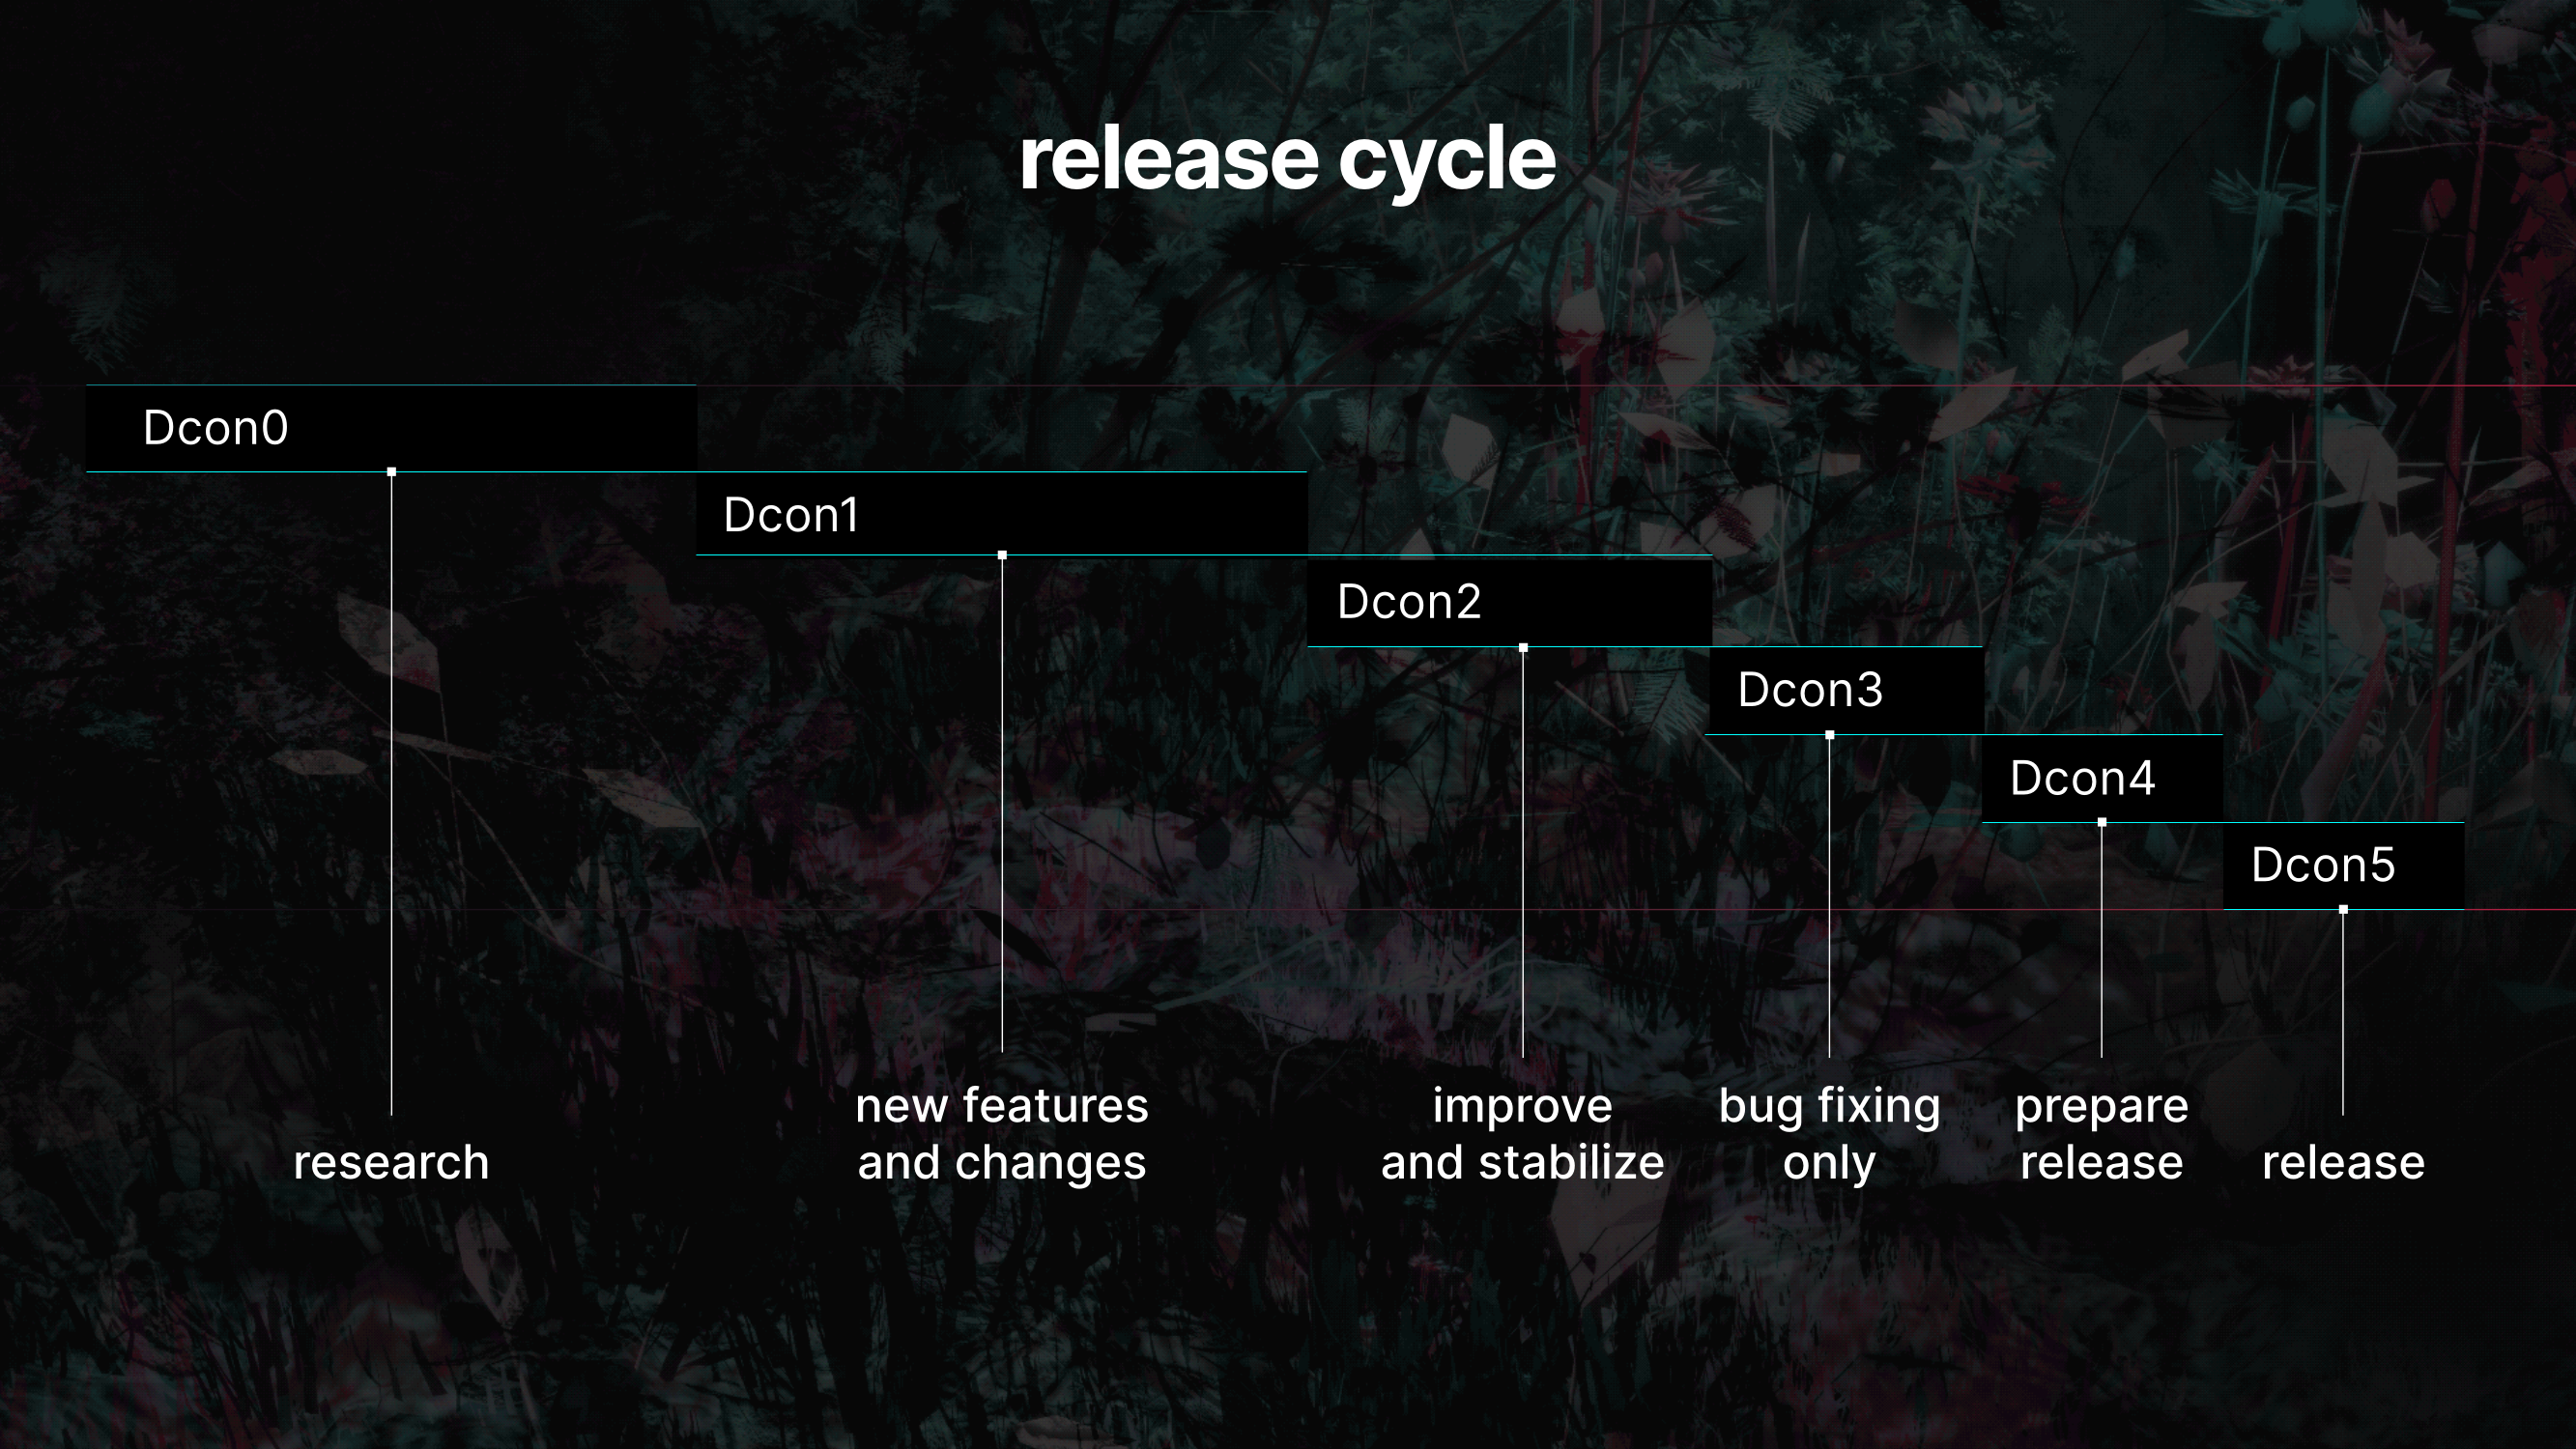 Release cycle